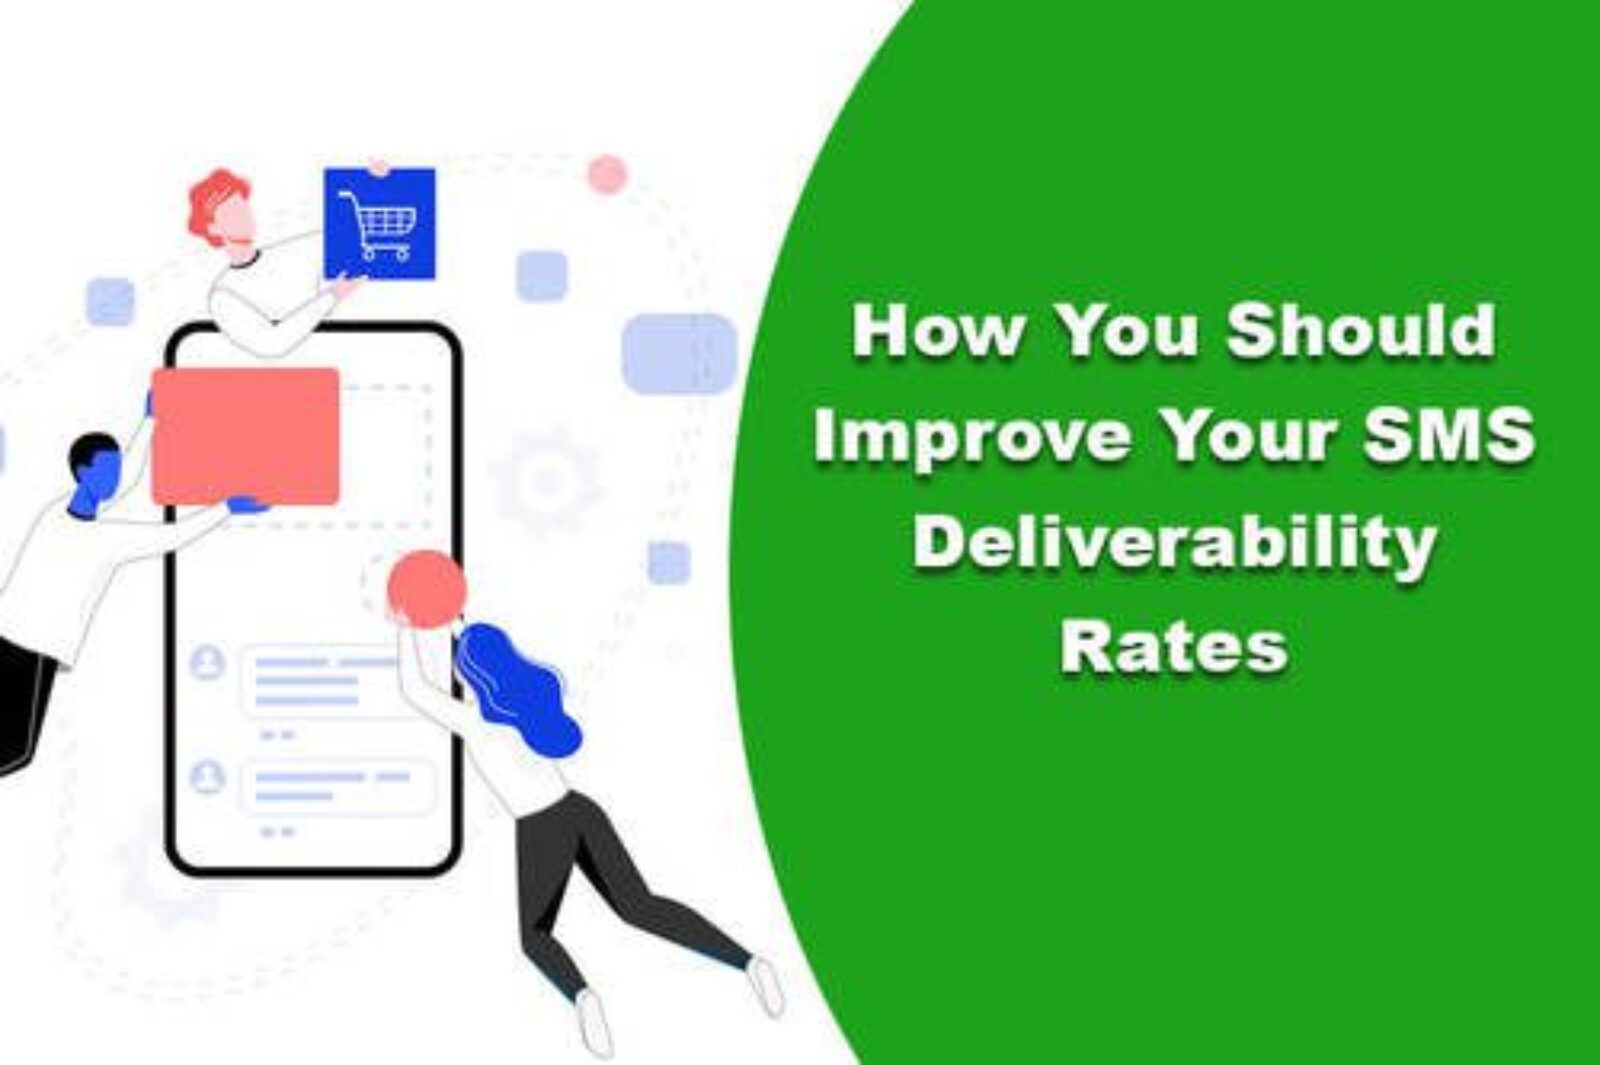 How you should improve your SMS delivery rate